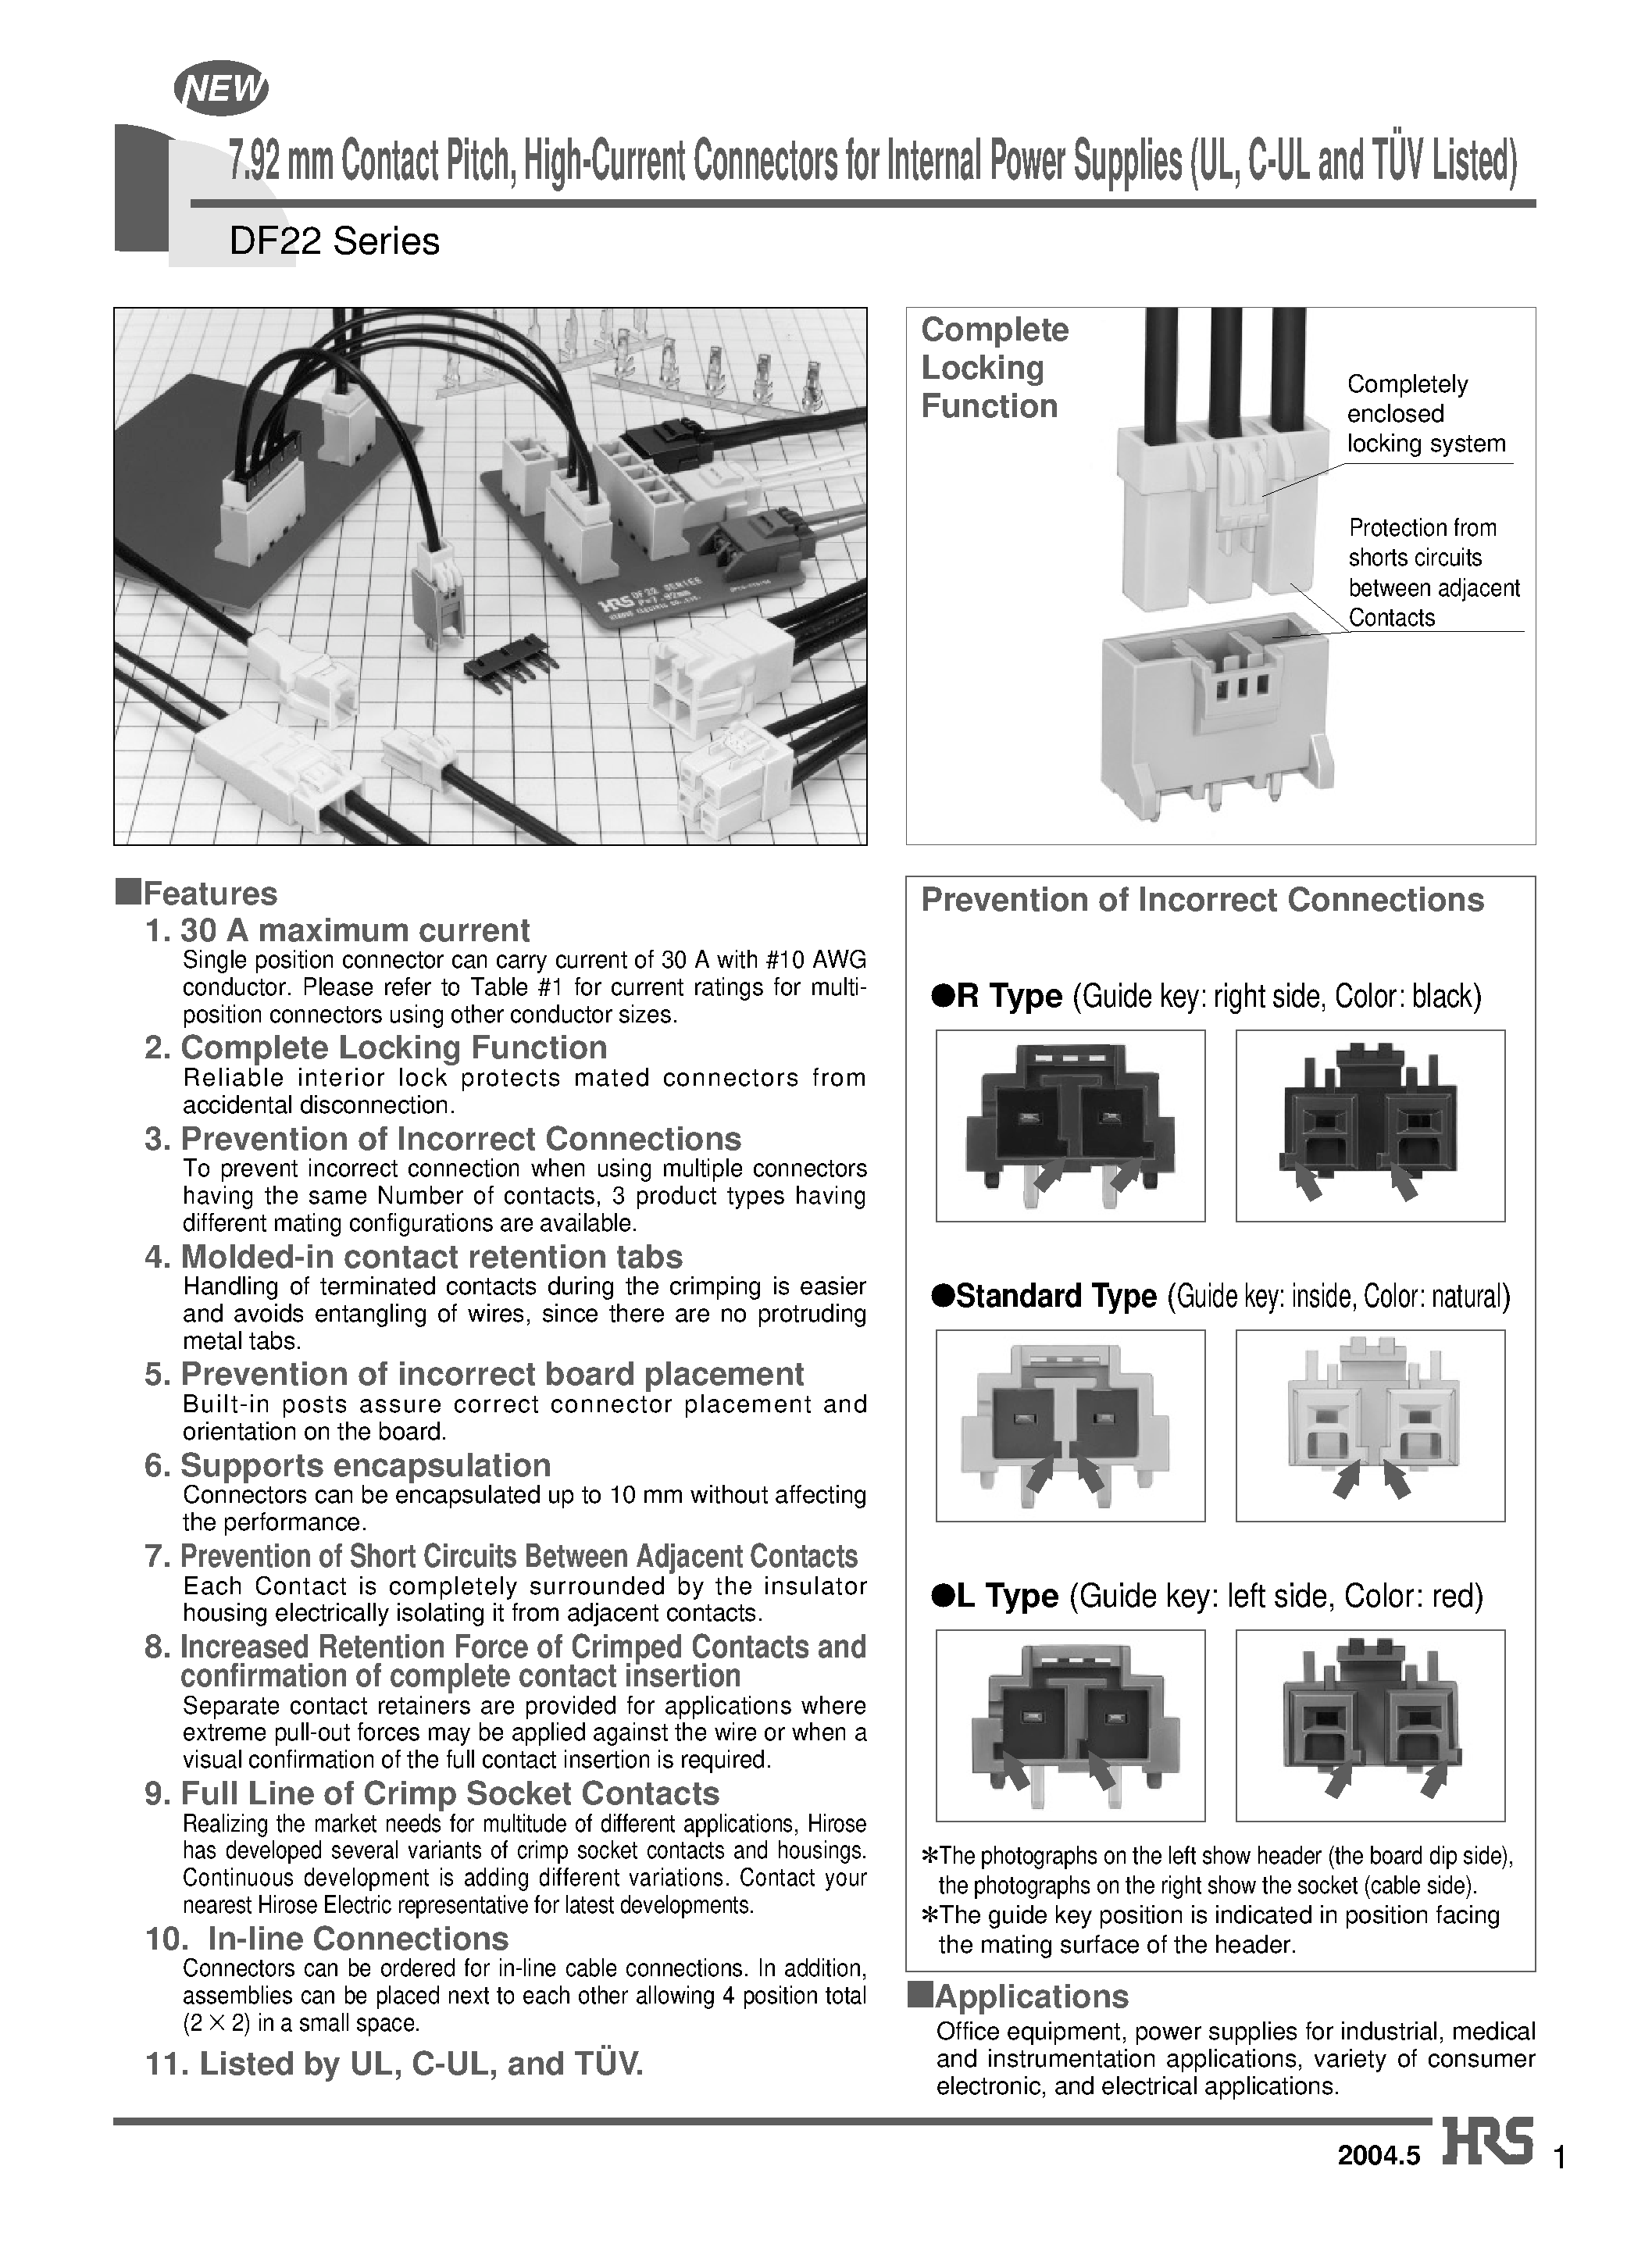 Даташит DF22C-1P-7.92C - 7.92 mm Contact Pitch/ High-Current Connectors for Internal Power Supplies (UL/ C-UL and TUV Listed) страница 1